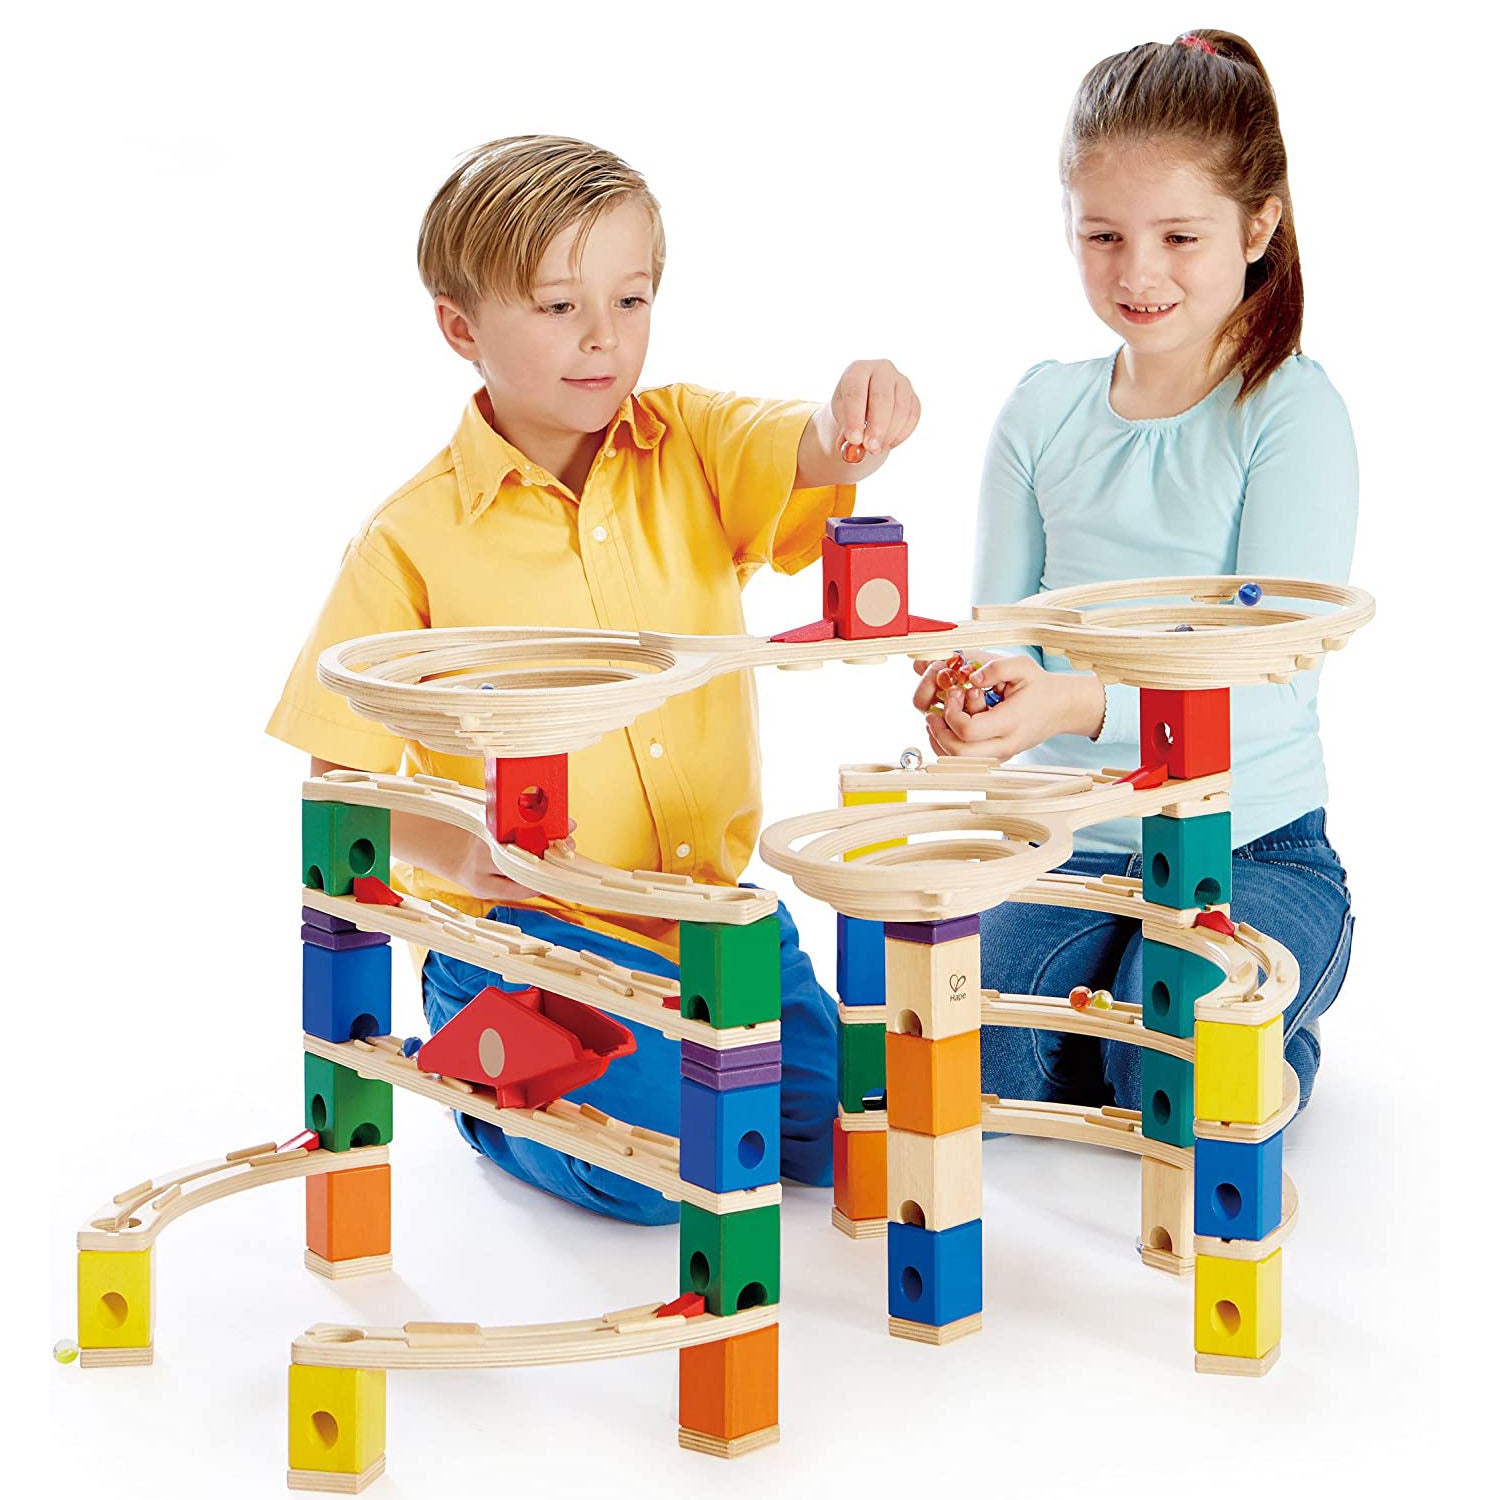 Hape Quadrilla Wooden Marble Run Construction | The Challenger |Quality Time Playing Together Wooden Safe Play | Smart Play for Smart Families - 147 Piece Multicolored Set